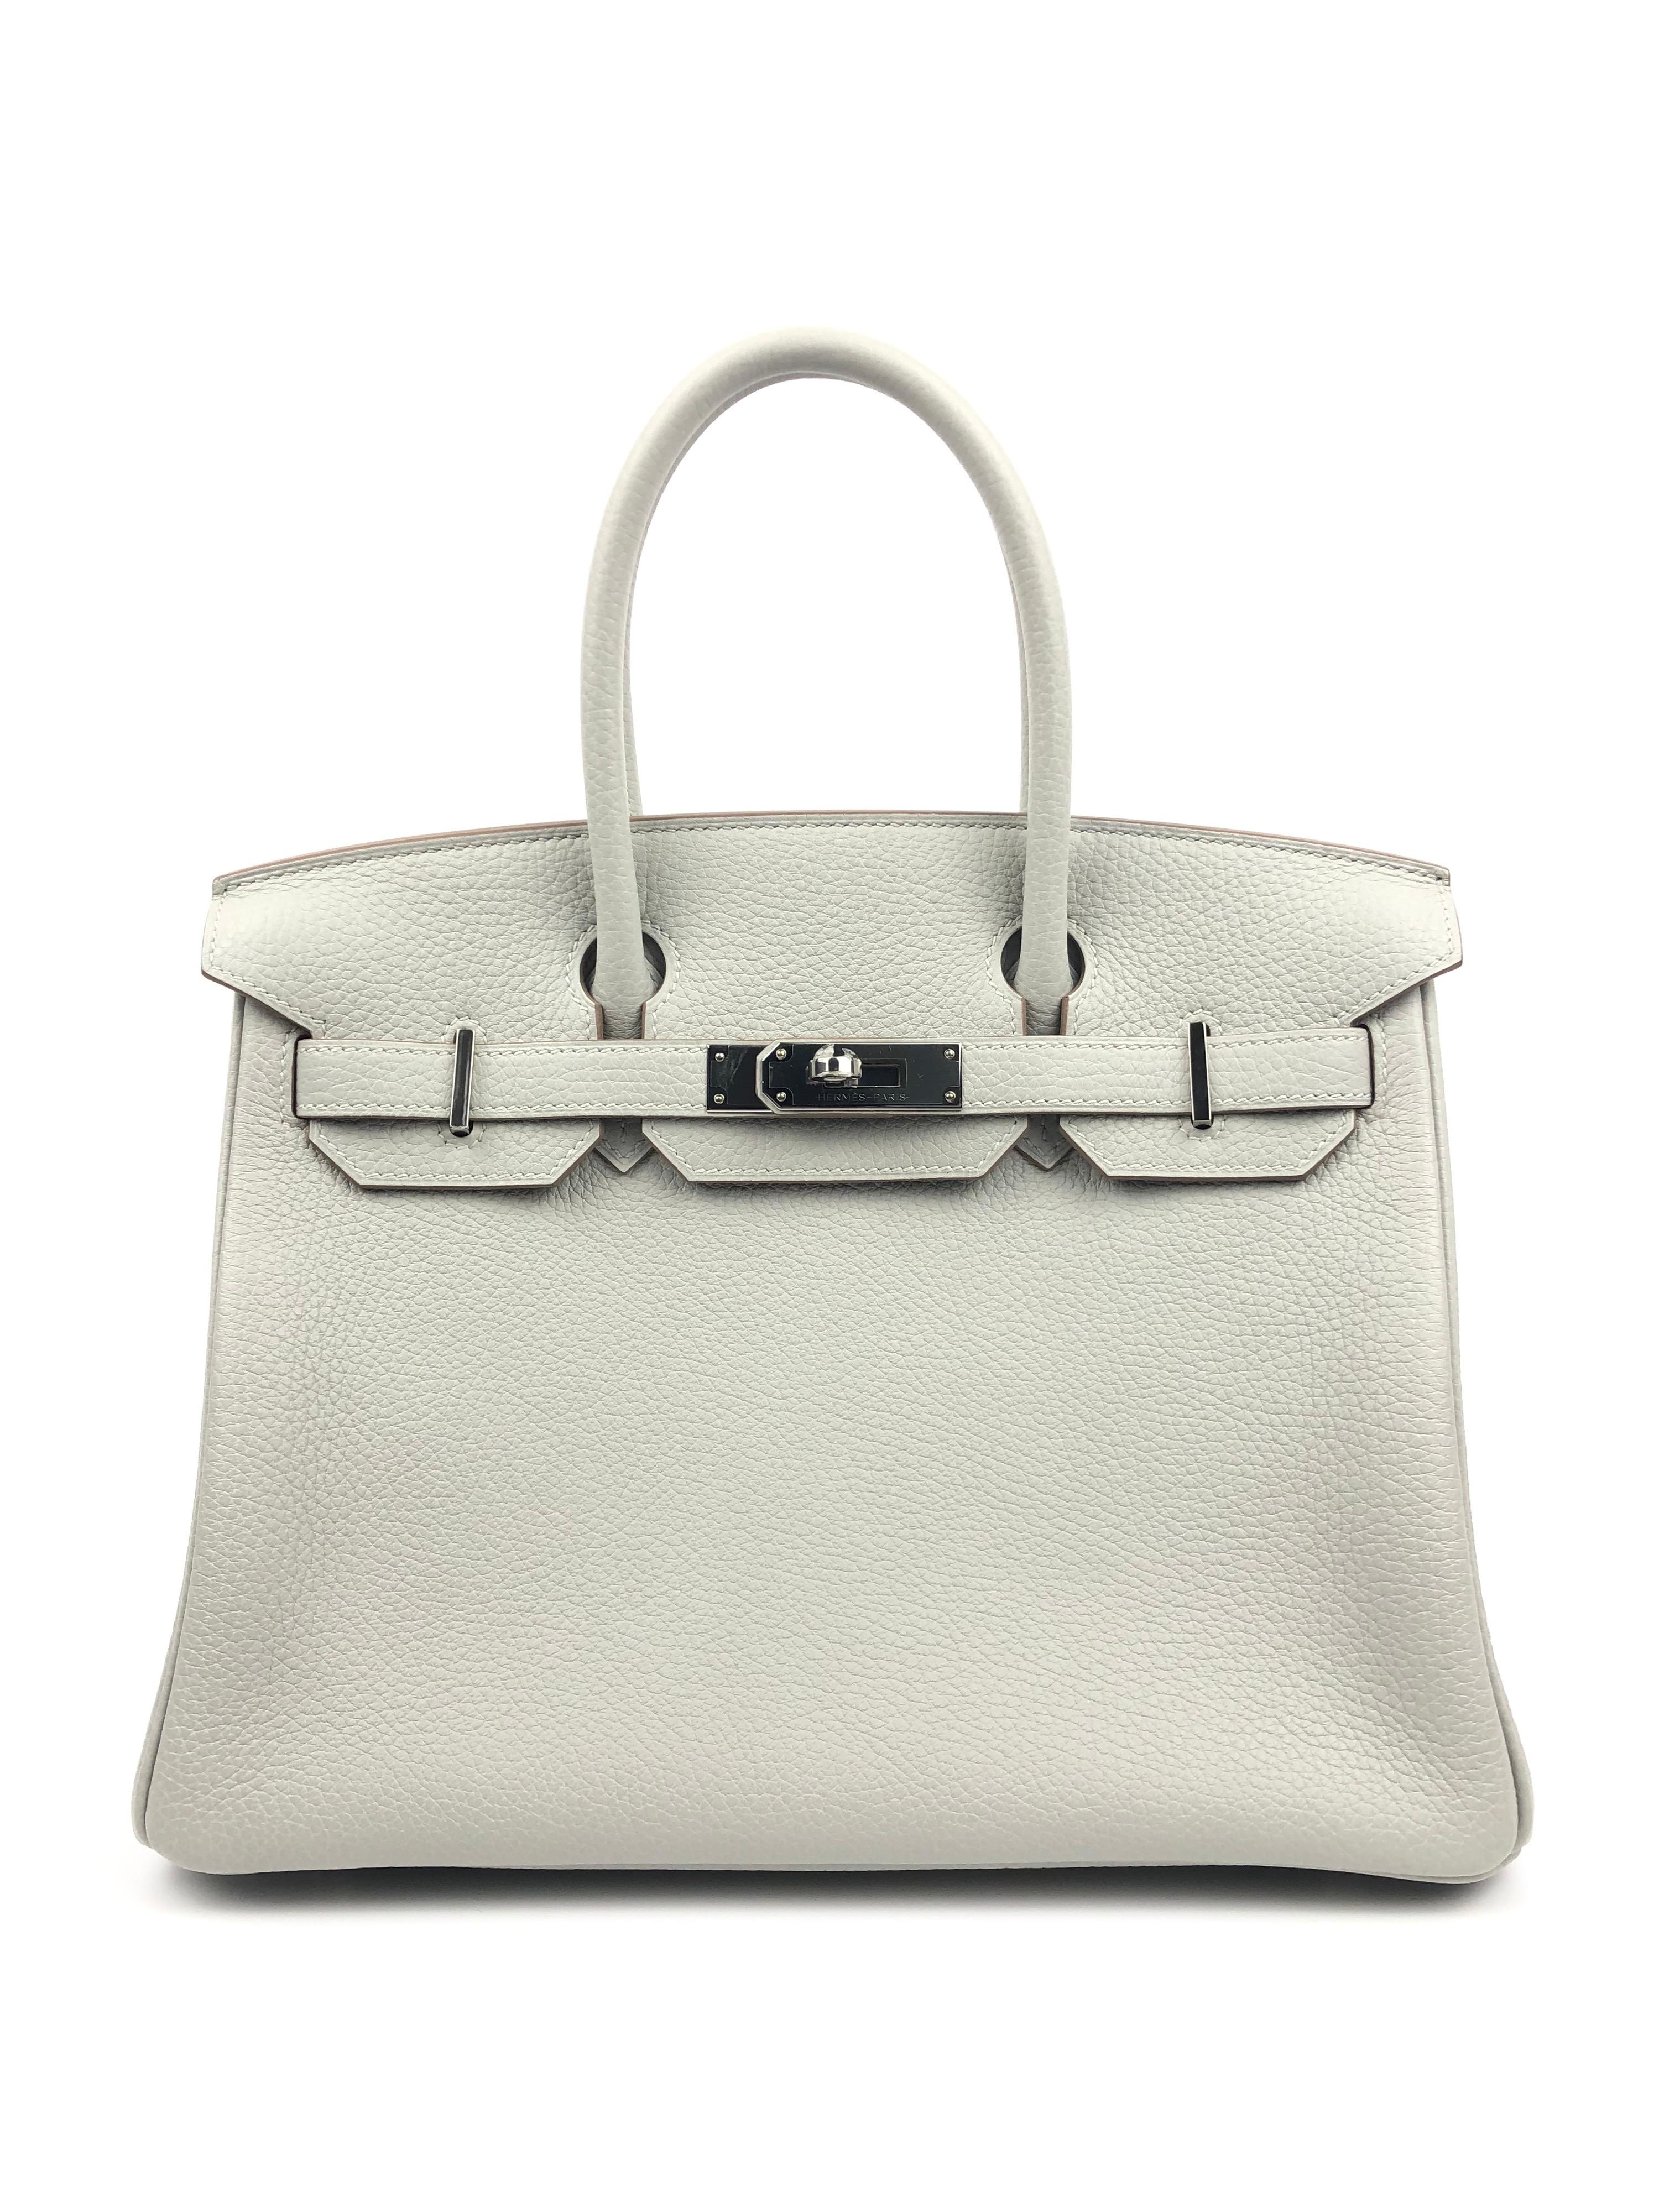 New Hermes Birkin 30 Gris Perle Pearl Gray Palladium Hardware. C Stamp 2018. From collectors closet Has been displayed but never carried out.

Shop with Confidence from Lux Addicts. Authenticity Guaranteed! 